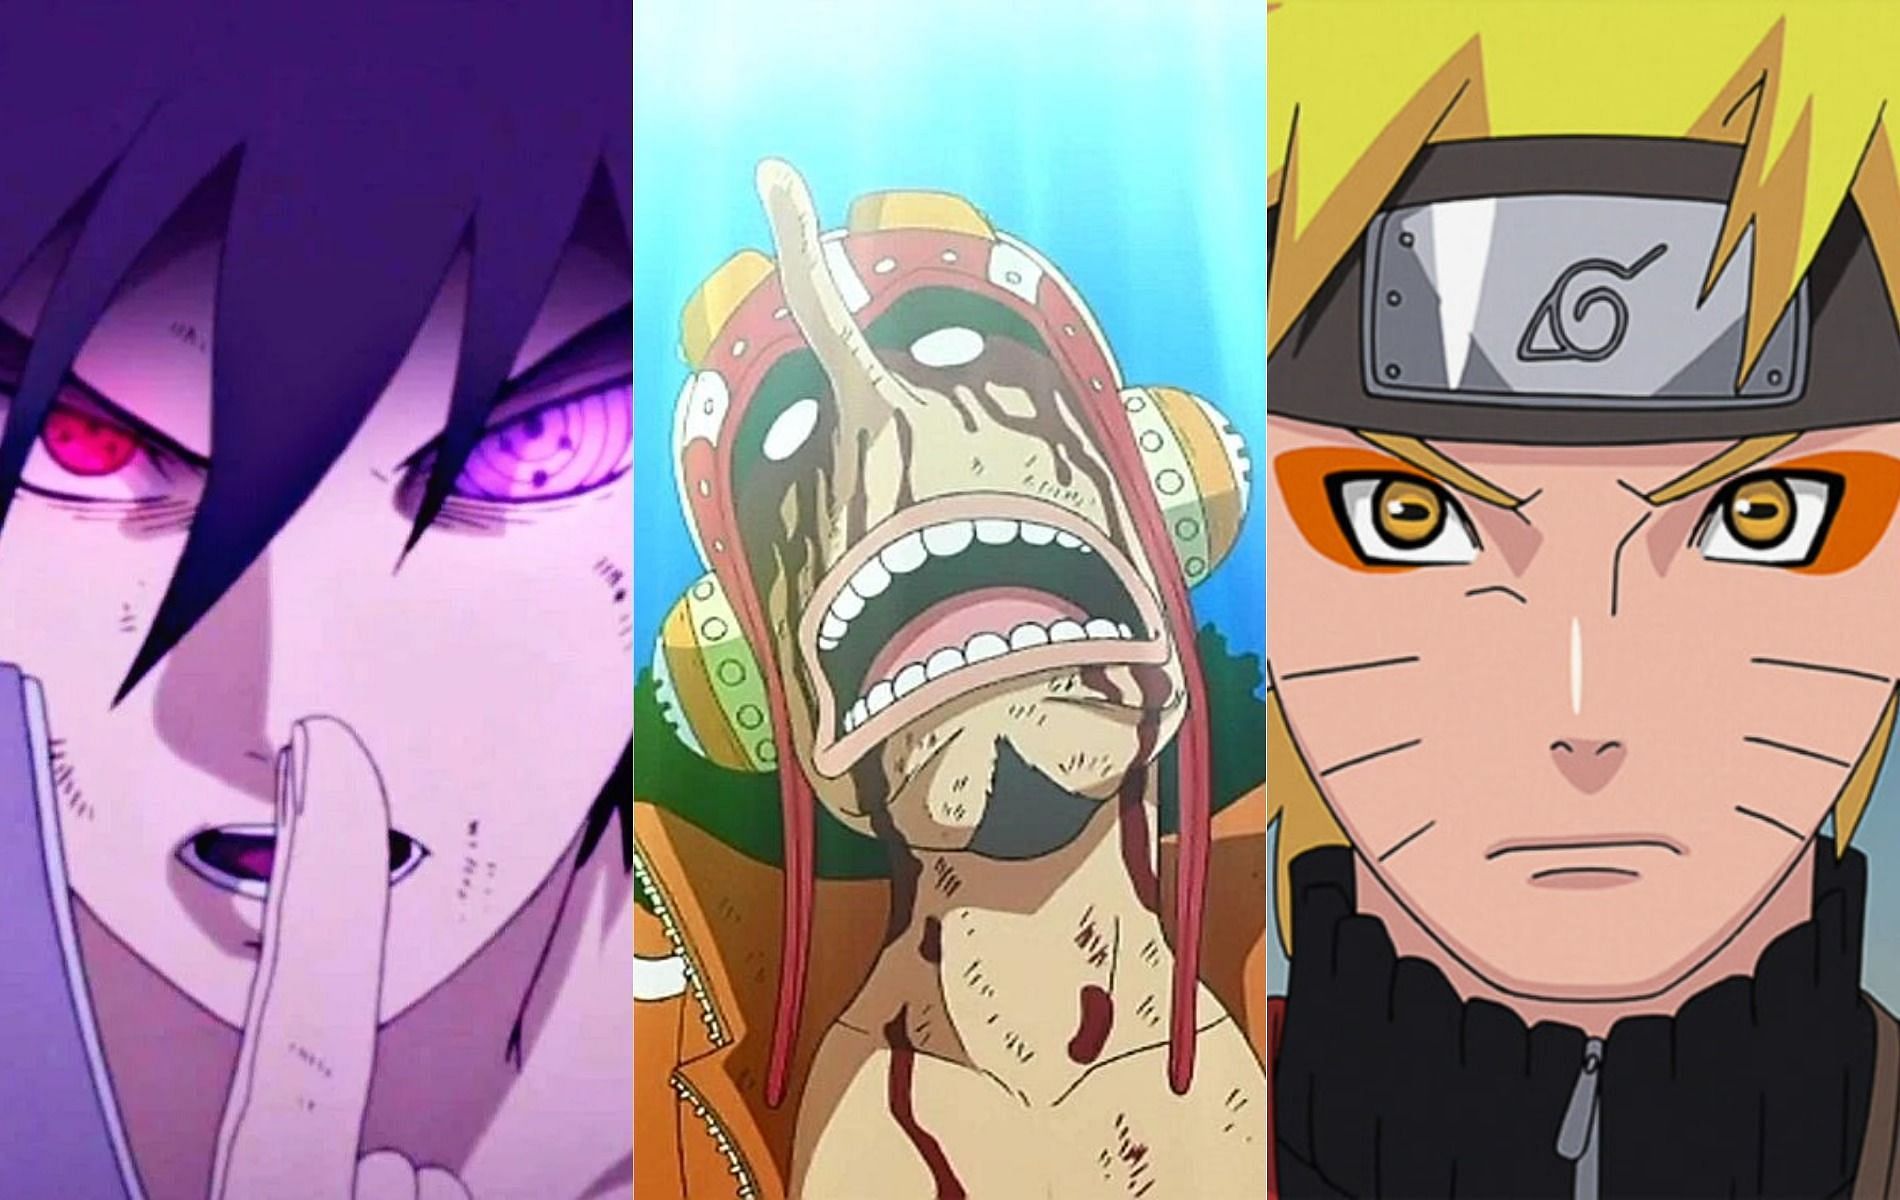 Who would win if all of the Straw Hat Pirates from the anime/manga